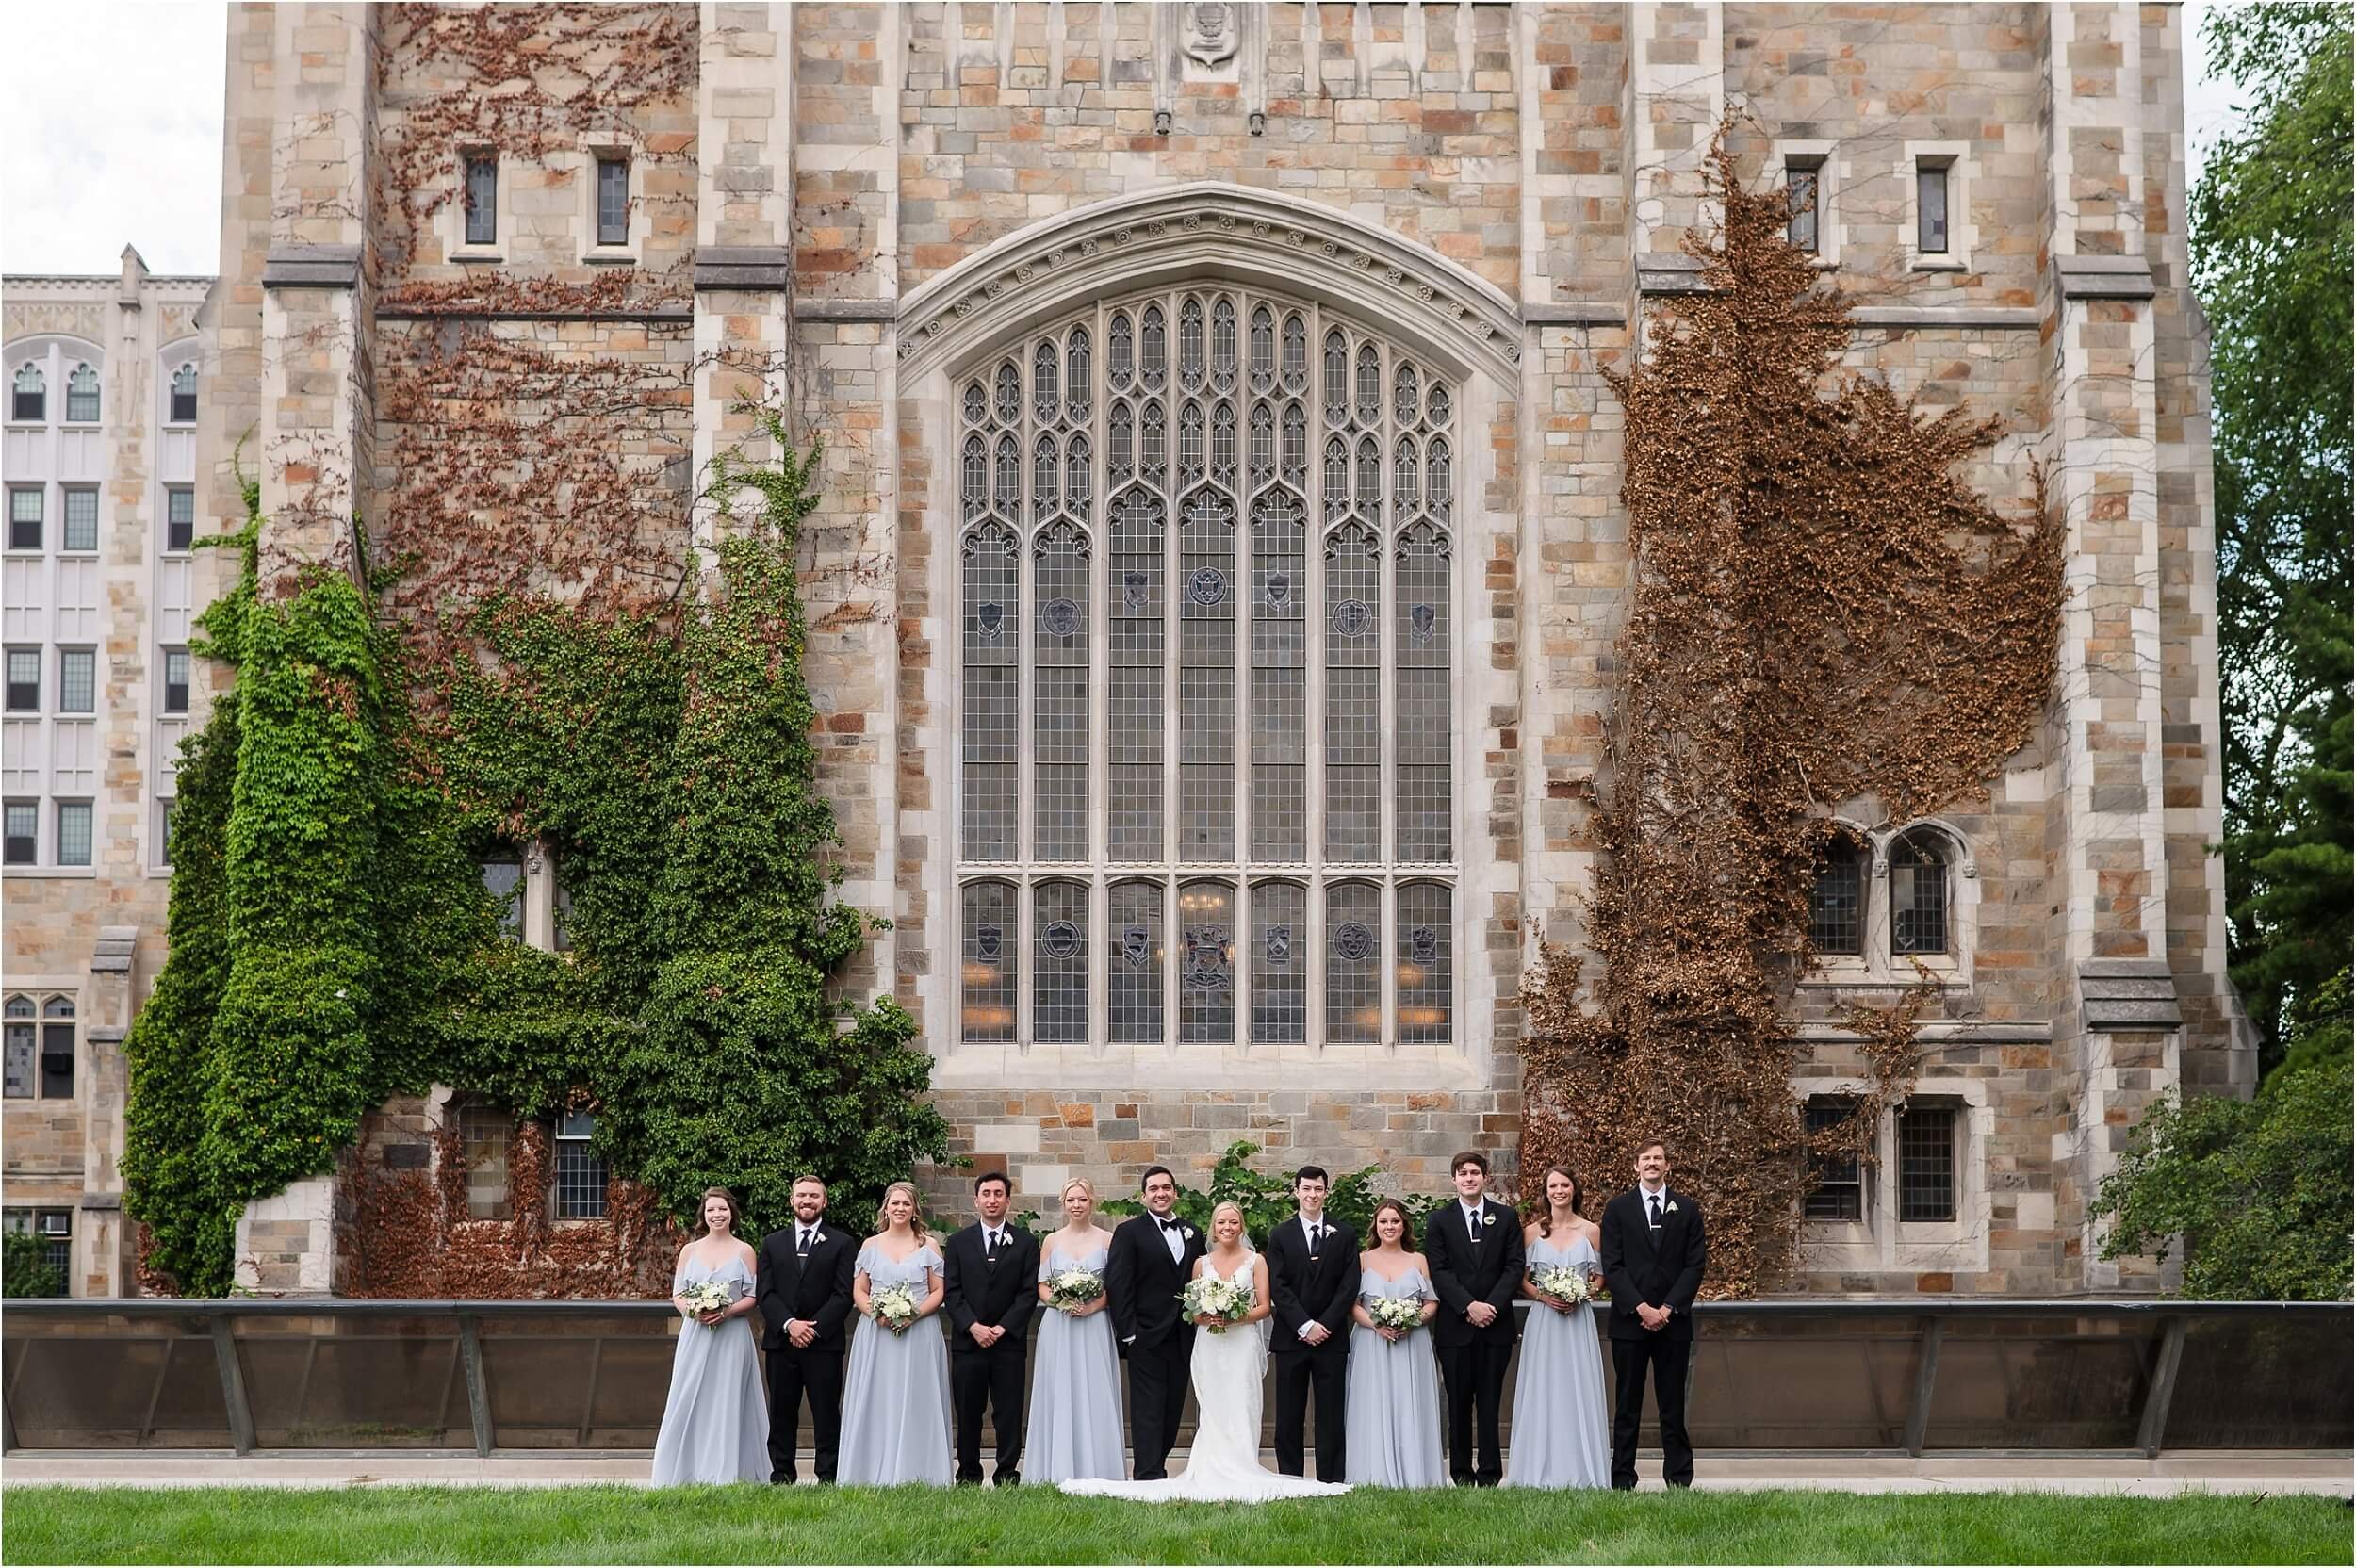  A wedding party stands in front of the University of Michigan Law Library on a summer day.  